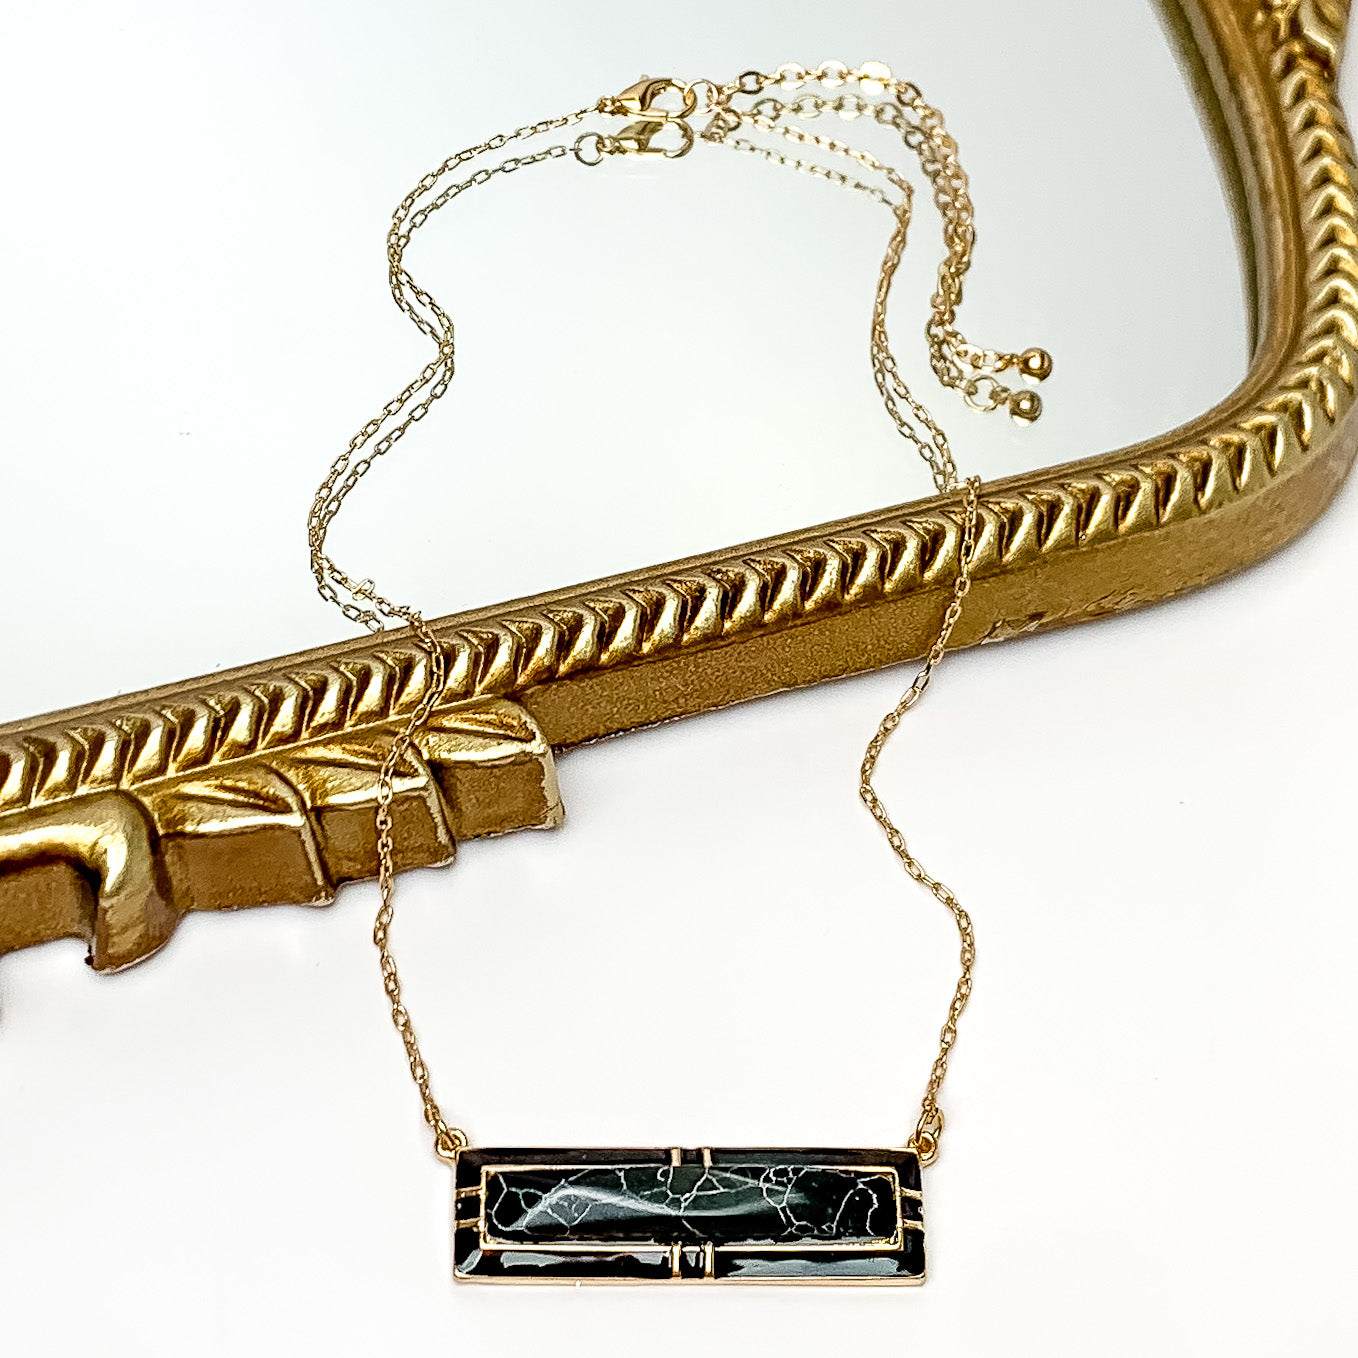 Everyday Gold Tone Chain Necklace With Rectangular Pendant in Black Marble - Giddy Up Glamour Boutique